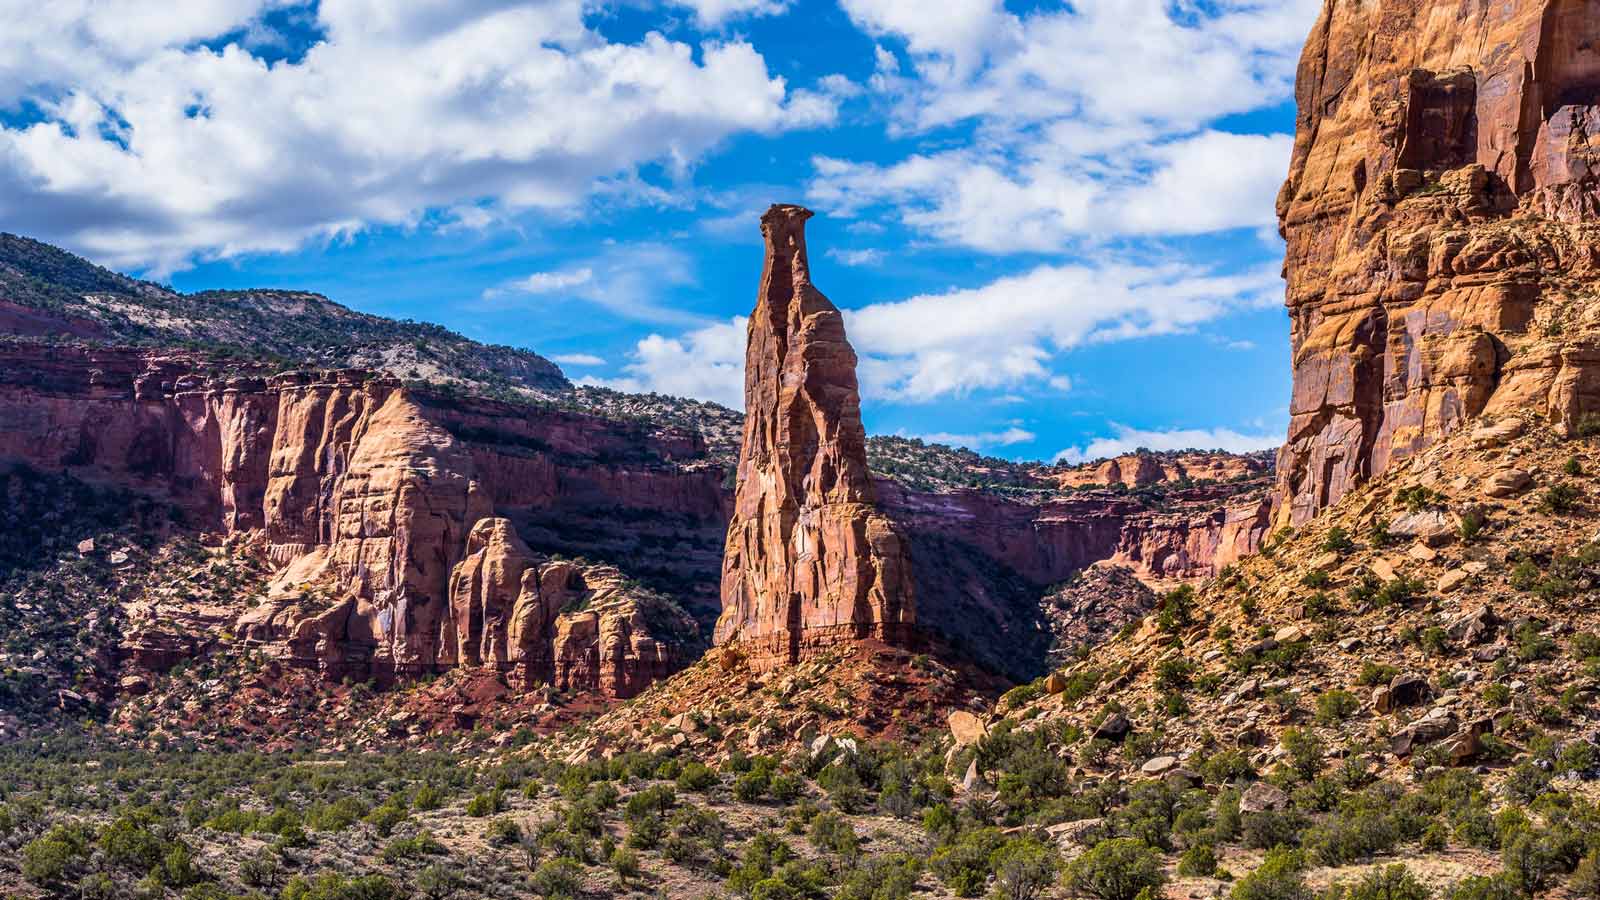 <p>Head to Western Colorado for a nature-filled trip to <a href="https://thehappinessfxn.com/things-to-do-in-grand-junction/">Grand Junction</a> — where I used to live. There’s no shortage of outdoor activities or places to do them in this part of the state. Hike at the <a href="https://thehappinessfxn.com/colorado-national-monument-in-one-day/">Colorado National Monument</a>, pick famed peaches or <a href="https://thehappinessfxn.com/palisade-wineries-western-colorado/">drink wine</a> in the Palisade orchards, go rock climbing at Unaweep Canyon, <a href="https://thehappinessfxn.com/grand-junction-rafting-trip/">go rafting</a> down the Colorado River, or test your mountain biking skills on the Kokopelli Trails.</p>